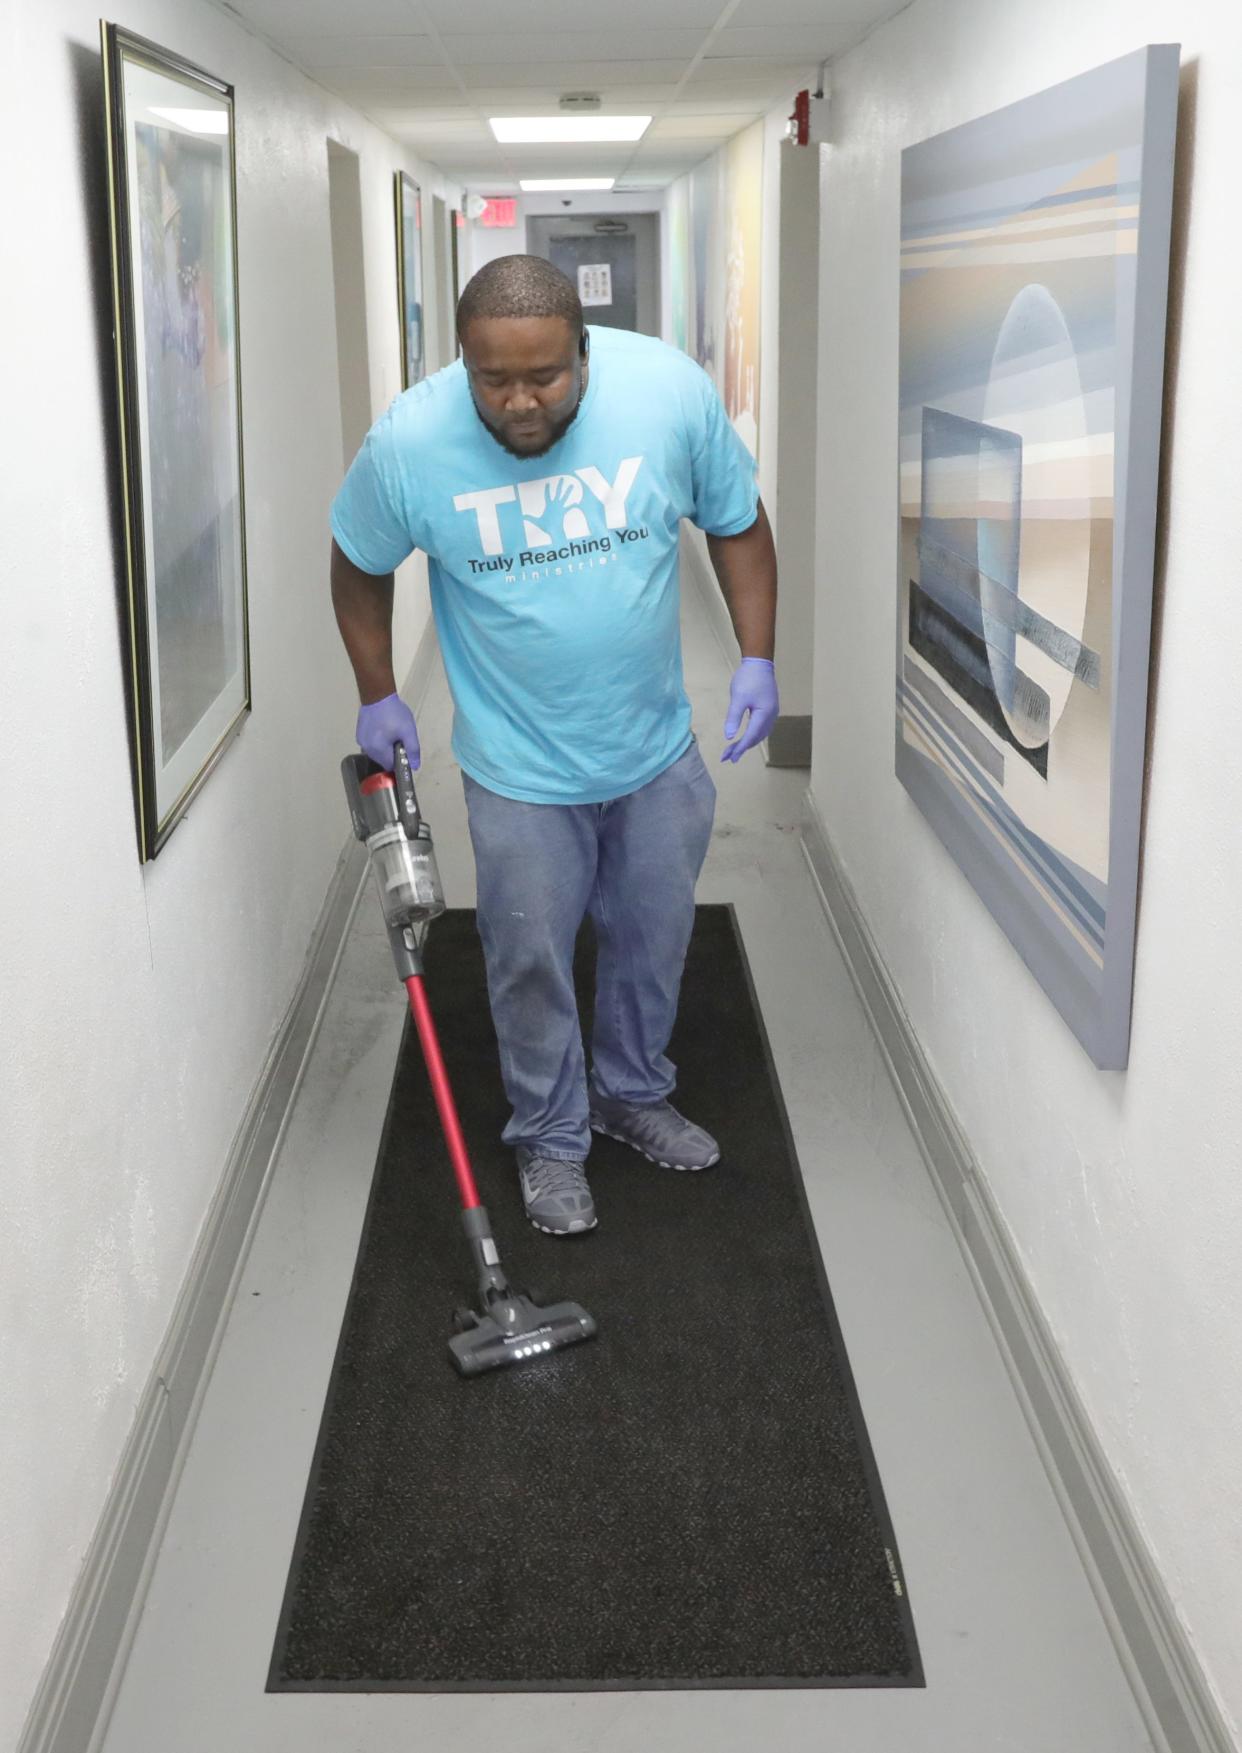 Edrick Mayfield runs a vacuum at an apartment building on Copley Road in Akron as part of his work with the TRY program.